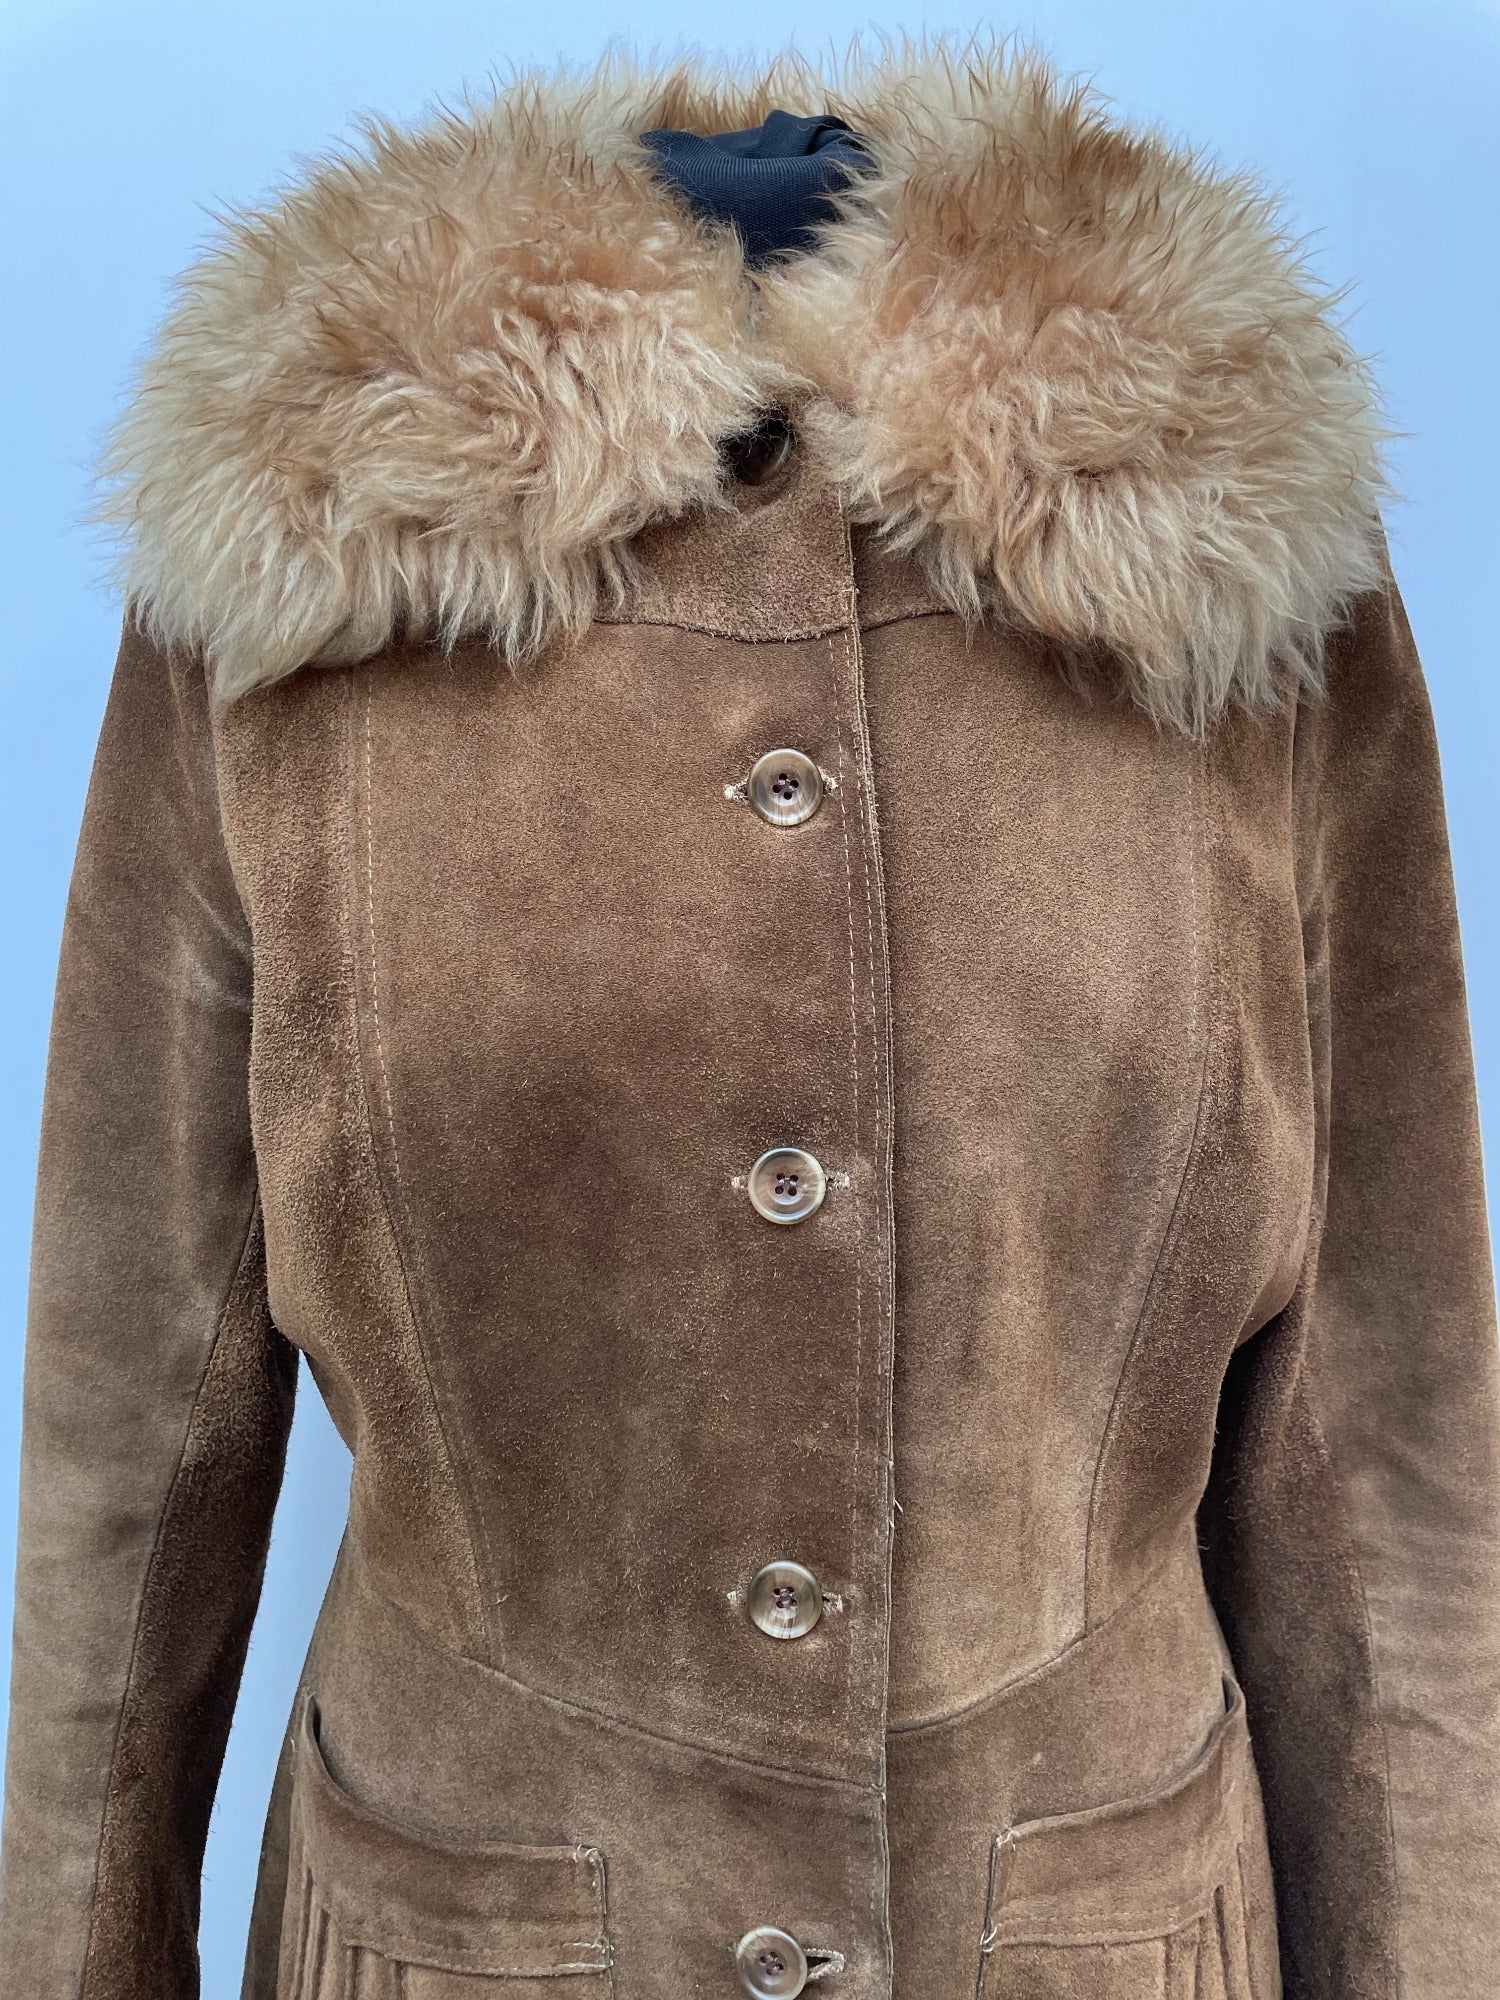 womens  Winter Coat  vintage  Urban Village Vintage  urban village  tan  Suede Jacket  Suede  sheepskin collar  Sheepskin  shearling  retro  quilted lining  quilted  pockets  long sleeve  Jacket  hippy  hippie  highway  coat  button down  button  brown  60s  1960s  16